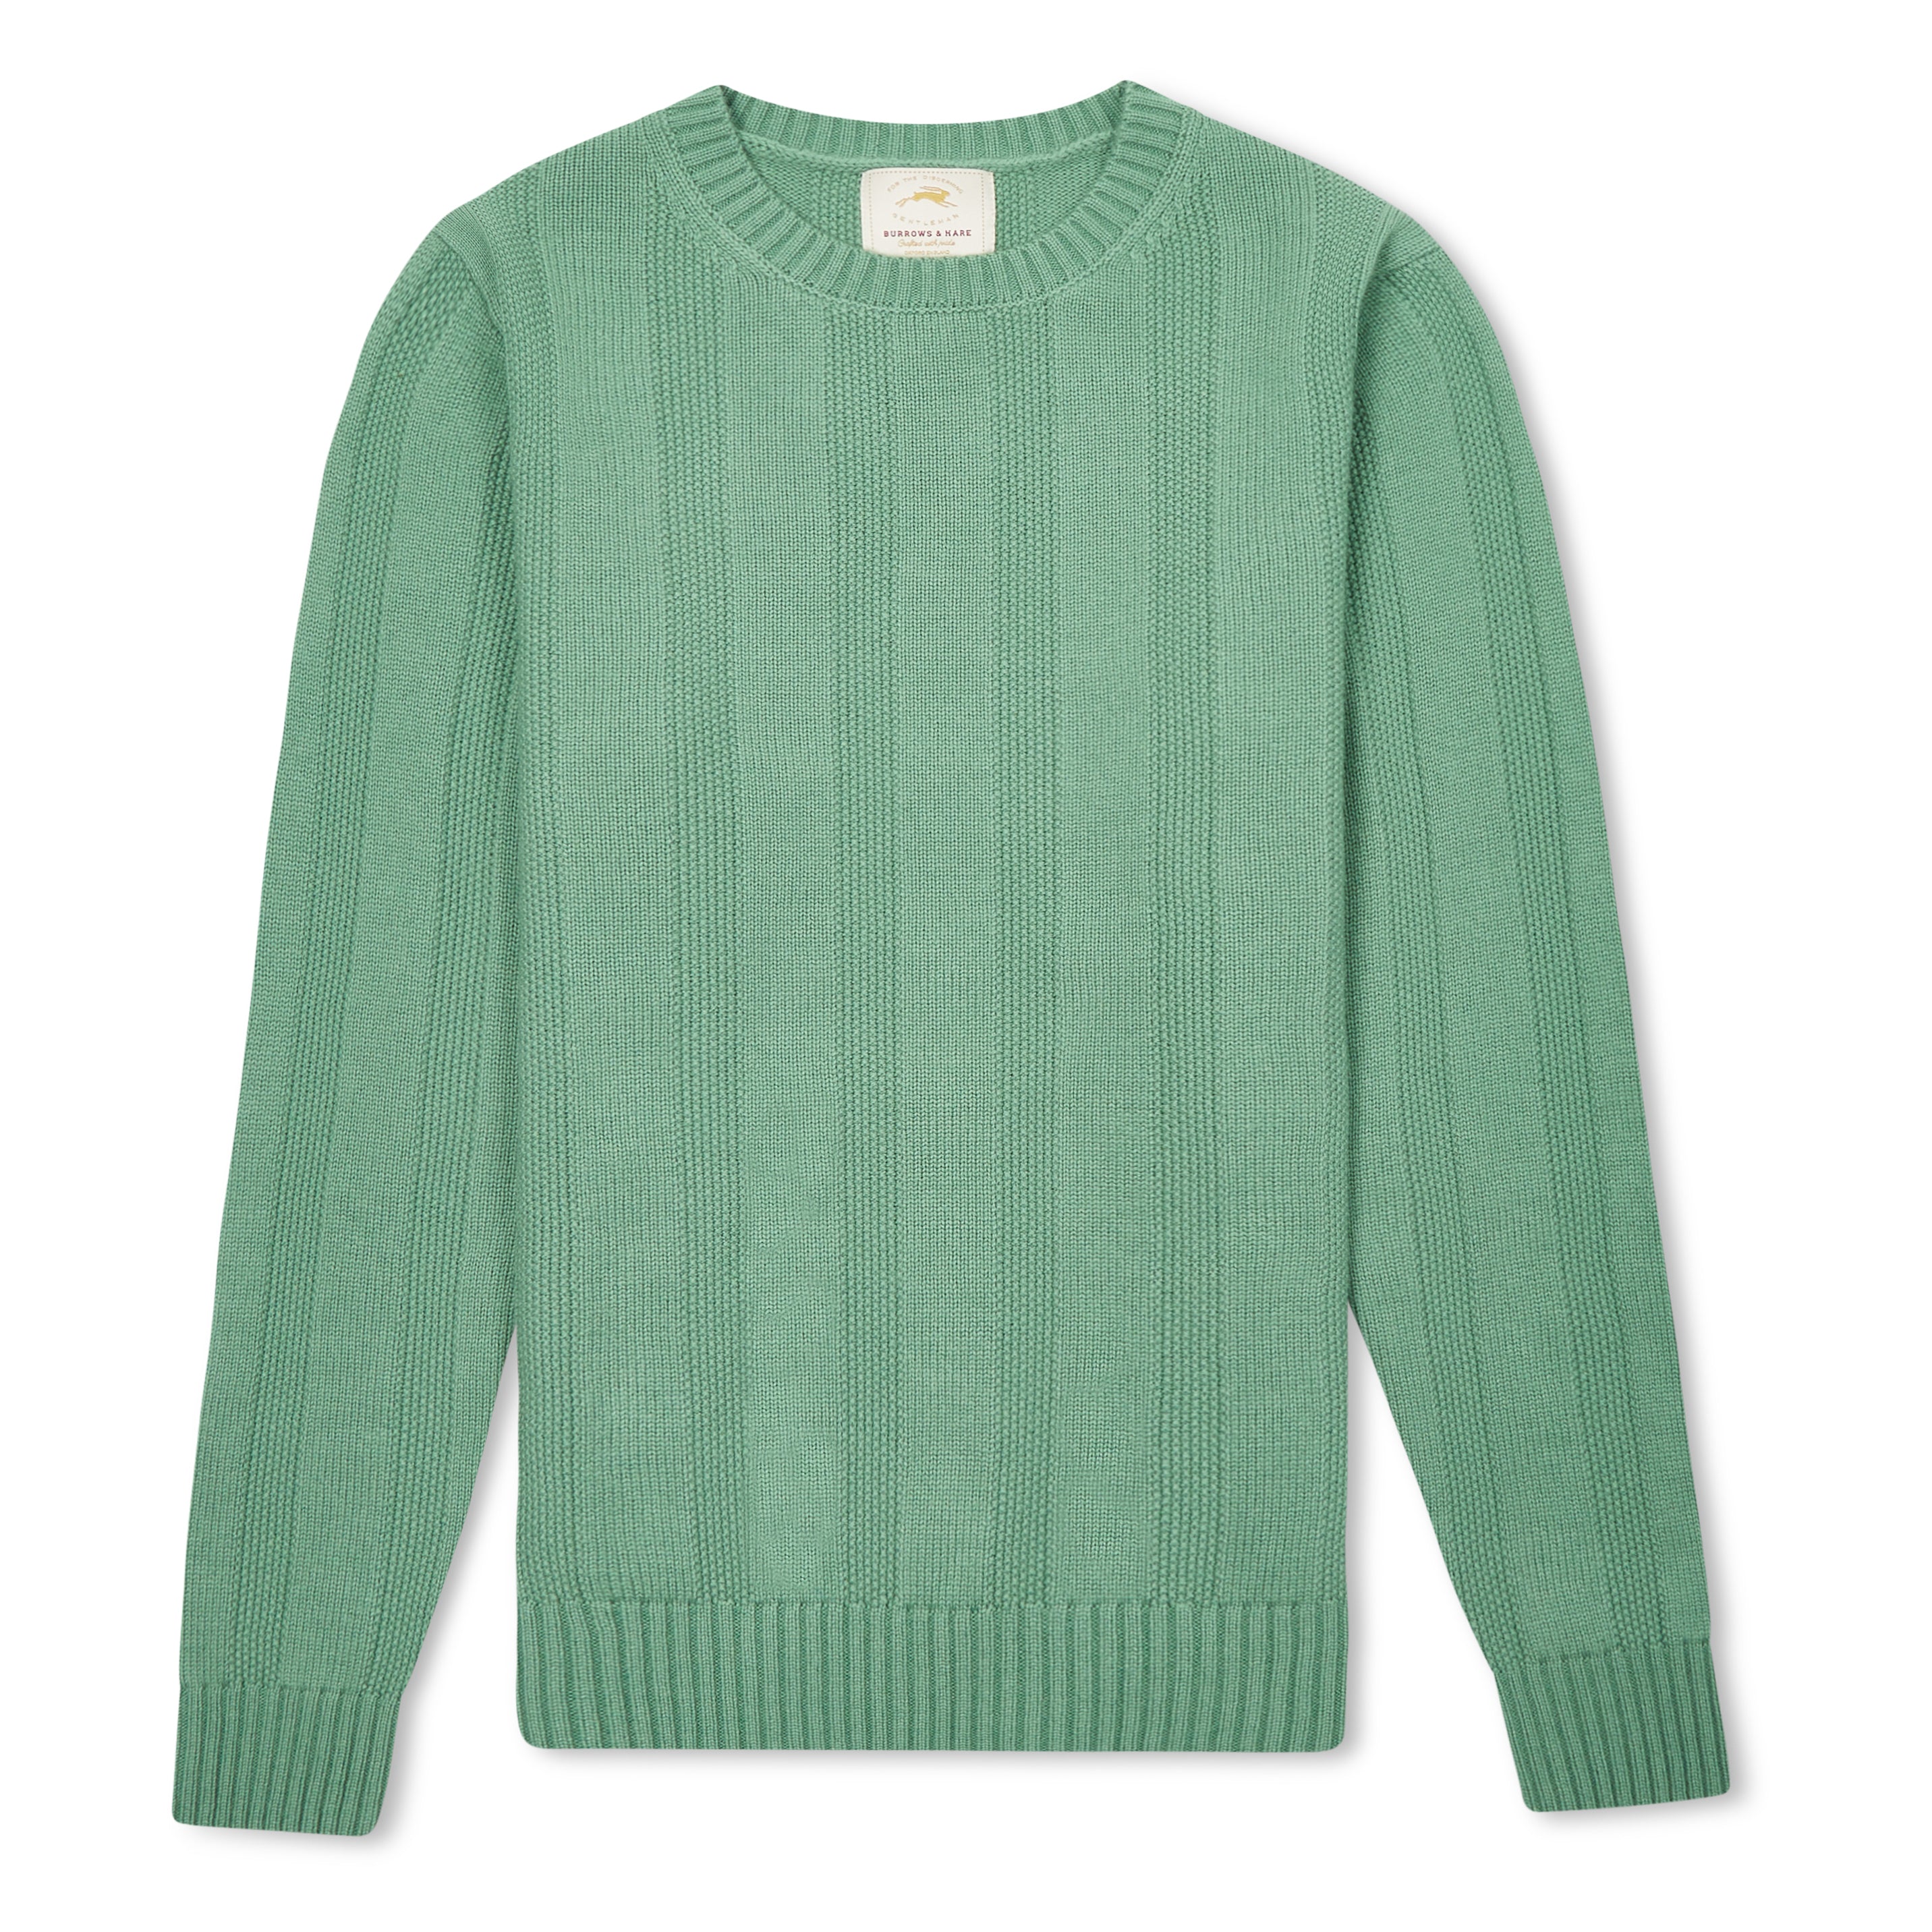 Burrows & Hare  Seed Stitch Jumper - Green